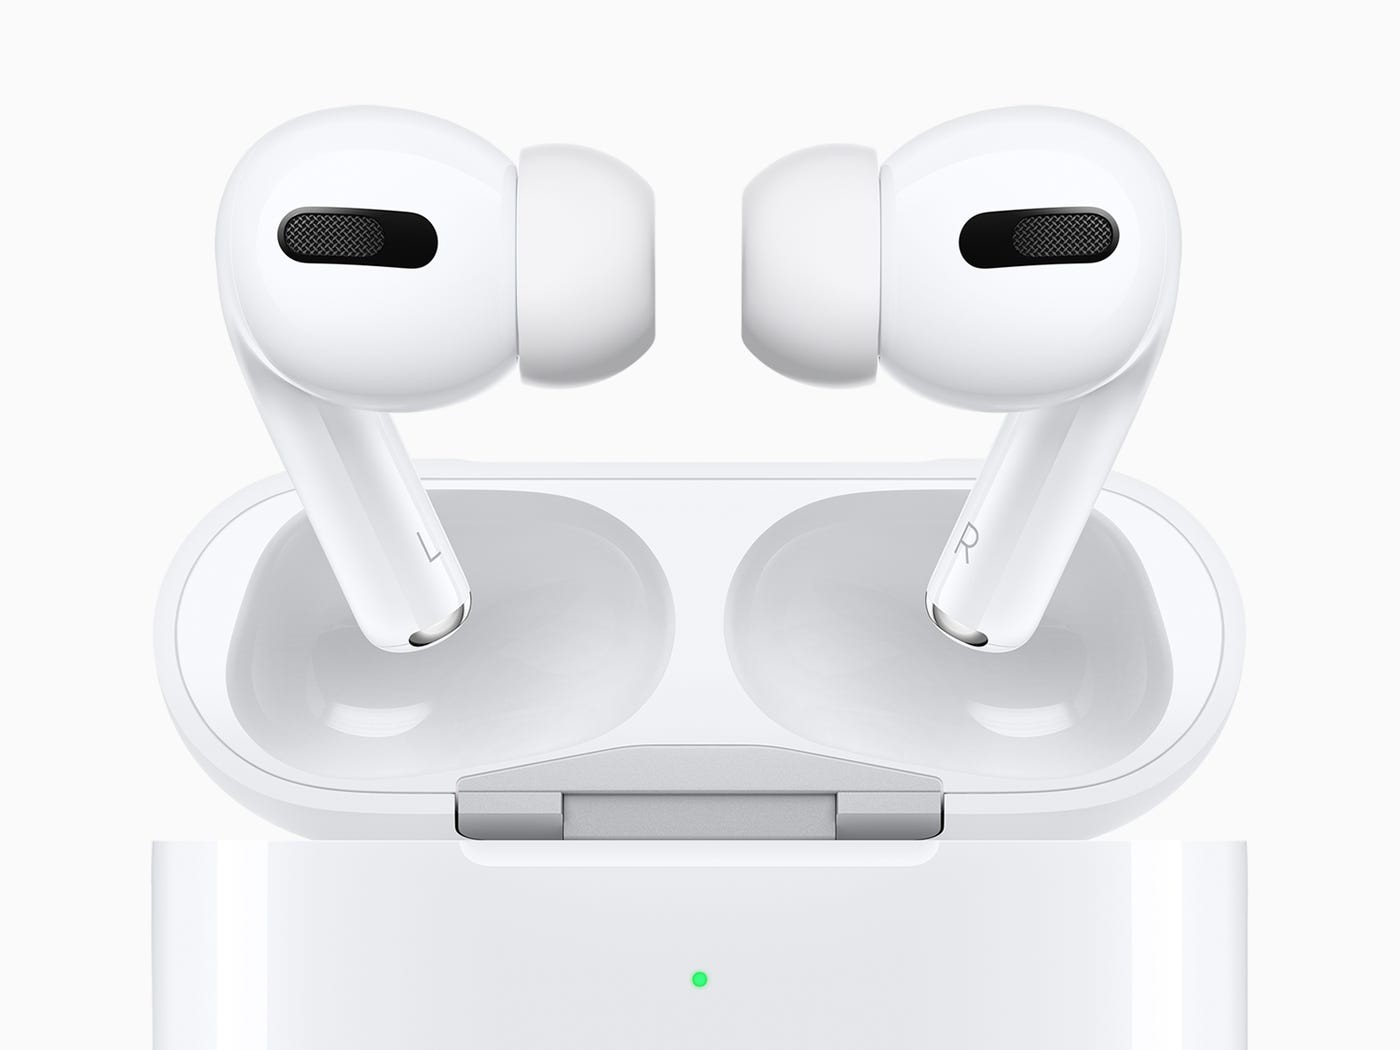 Chinese factories rushing to get knock-offs Apple's AirPods Pro to local buyers the day after US release | South China Morning Post